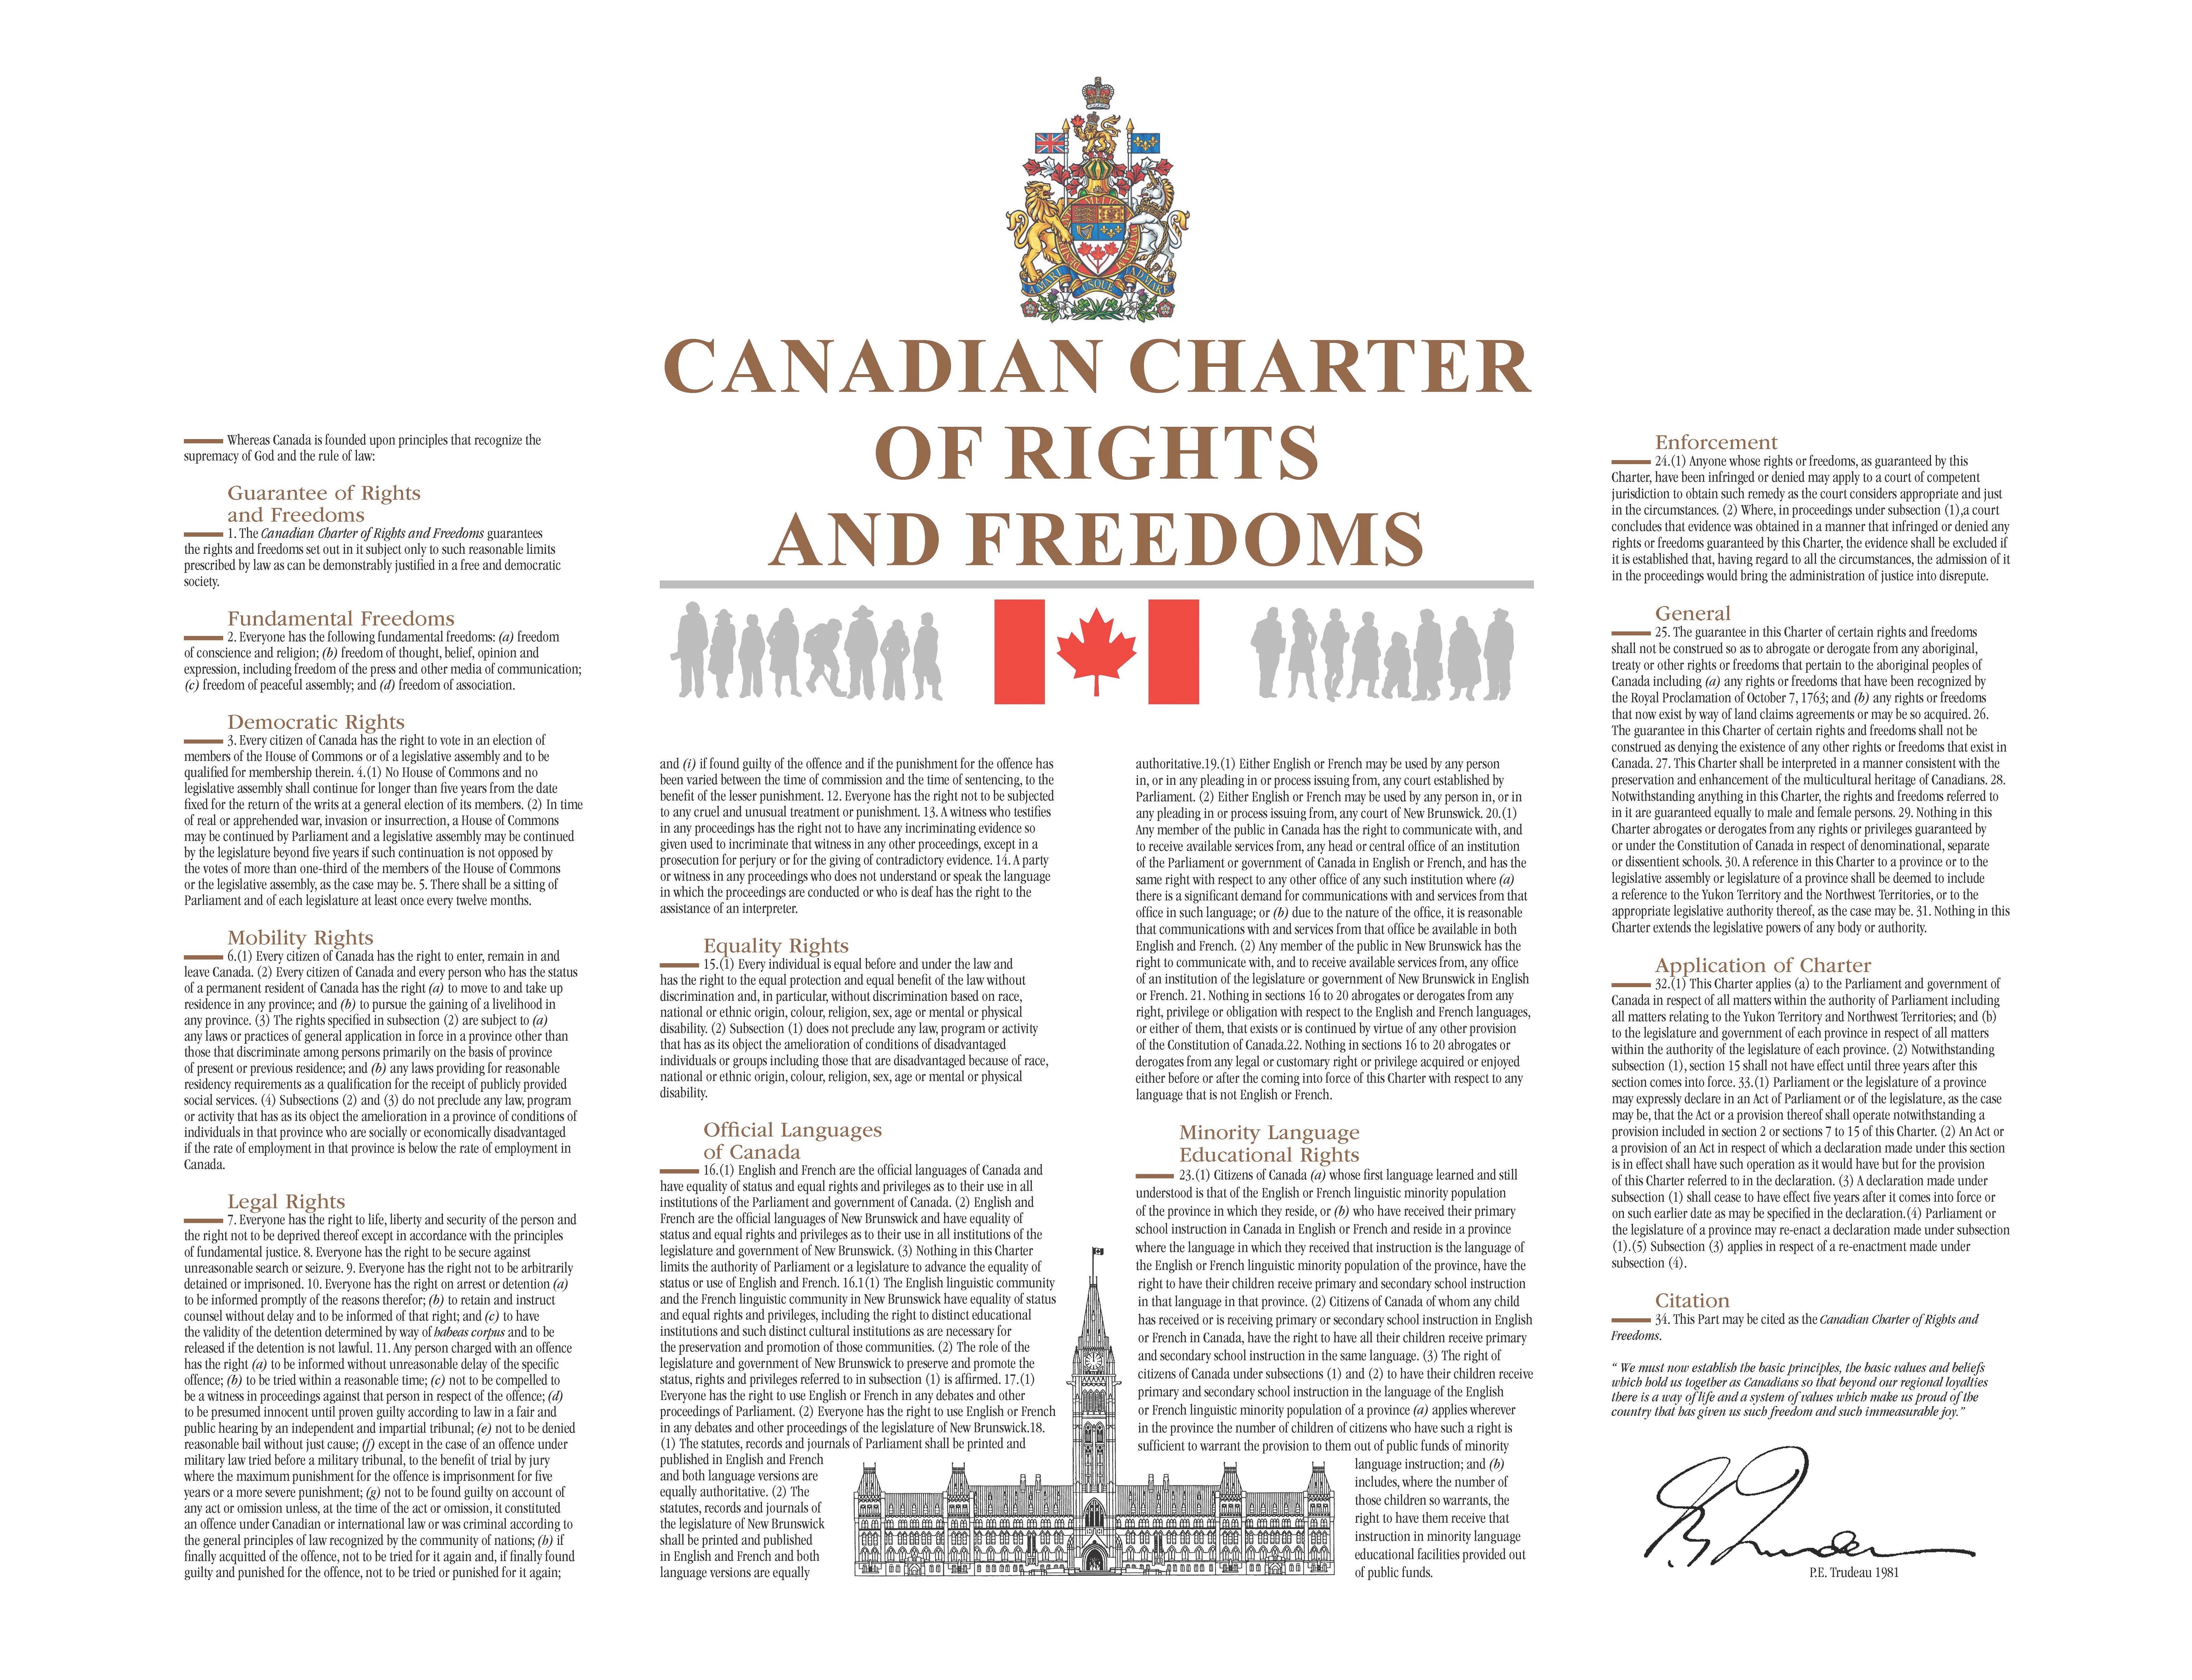 Image of the Canadian Charter of Rights and Freedoms Certificate